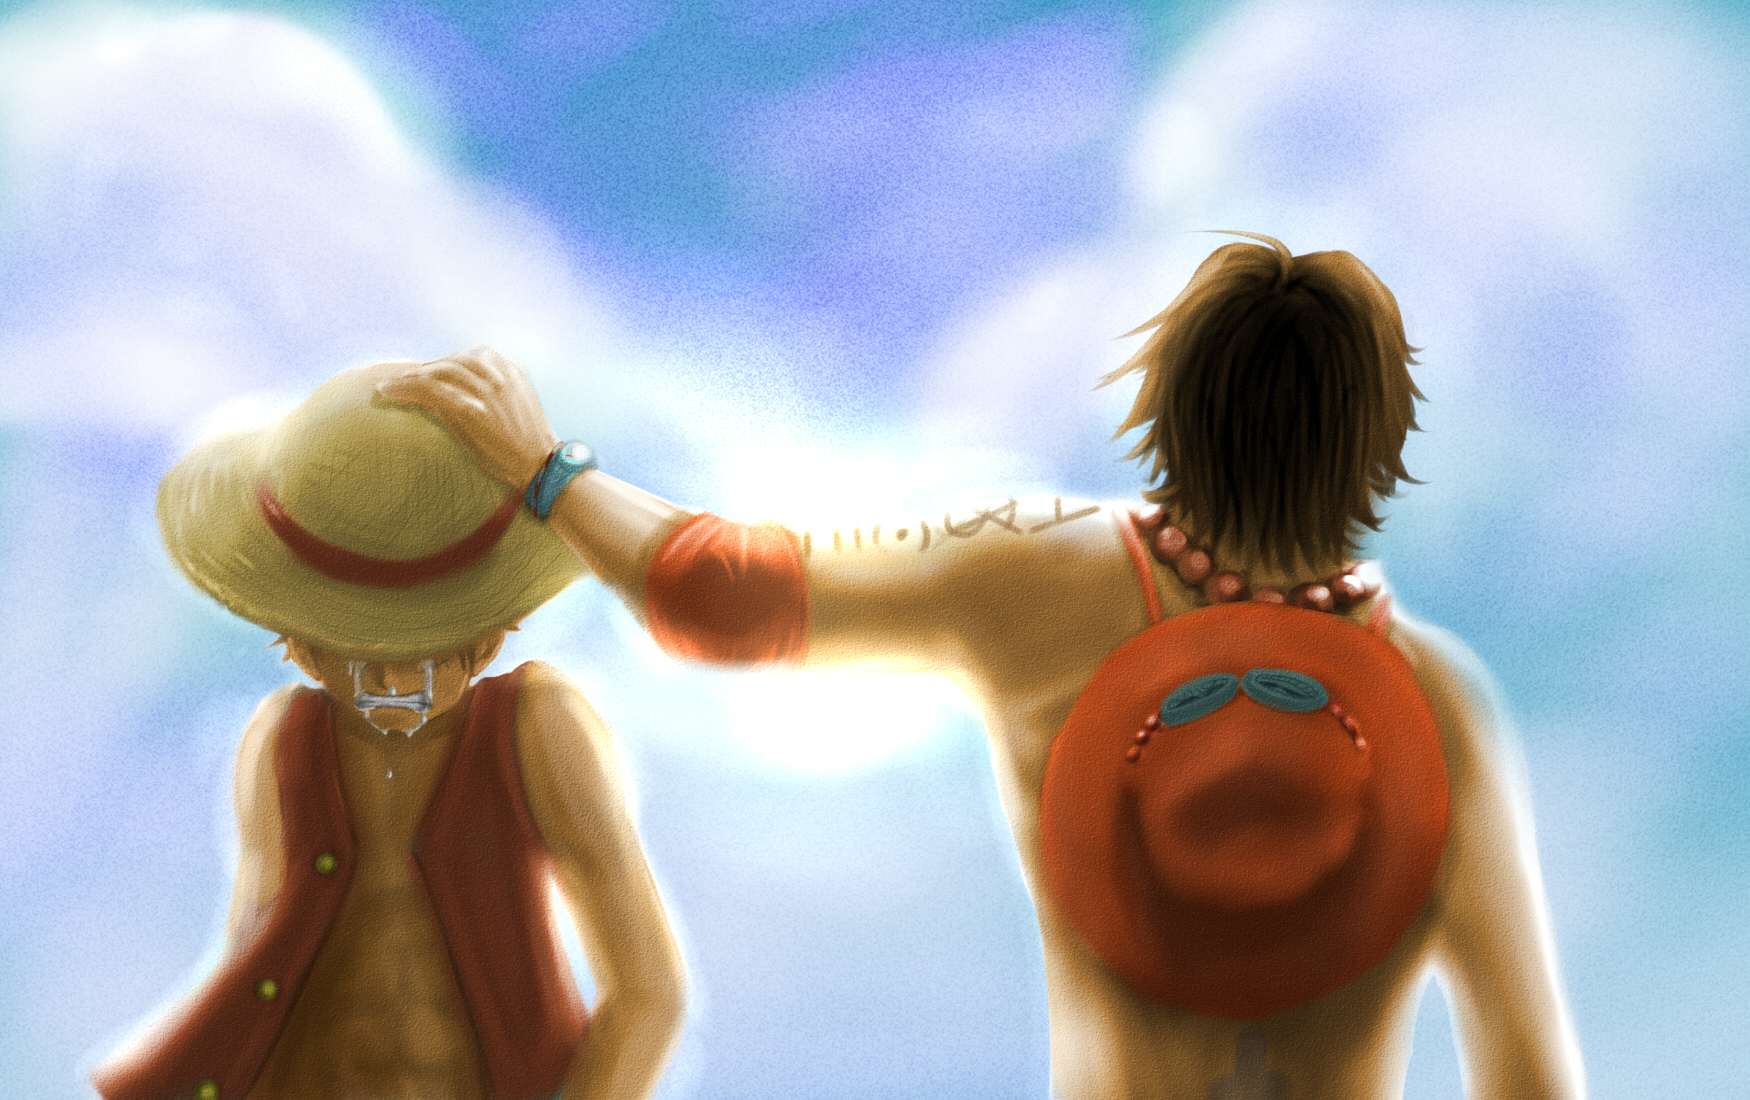 Luffy's brother Wallpaper and Background Image | 1750x1100 | ID:863890